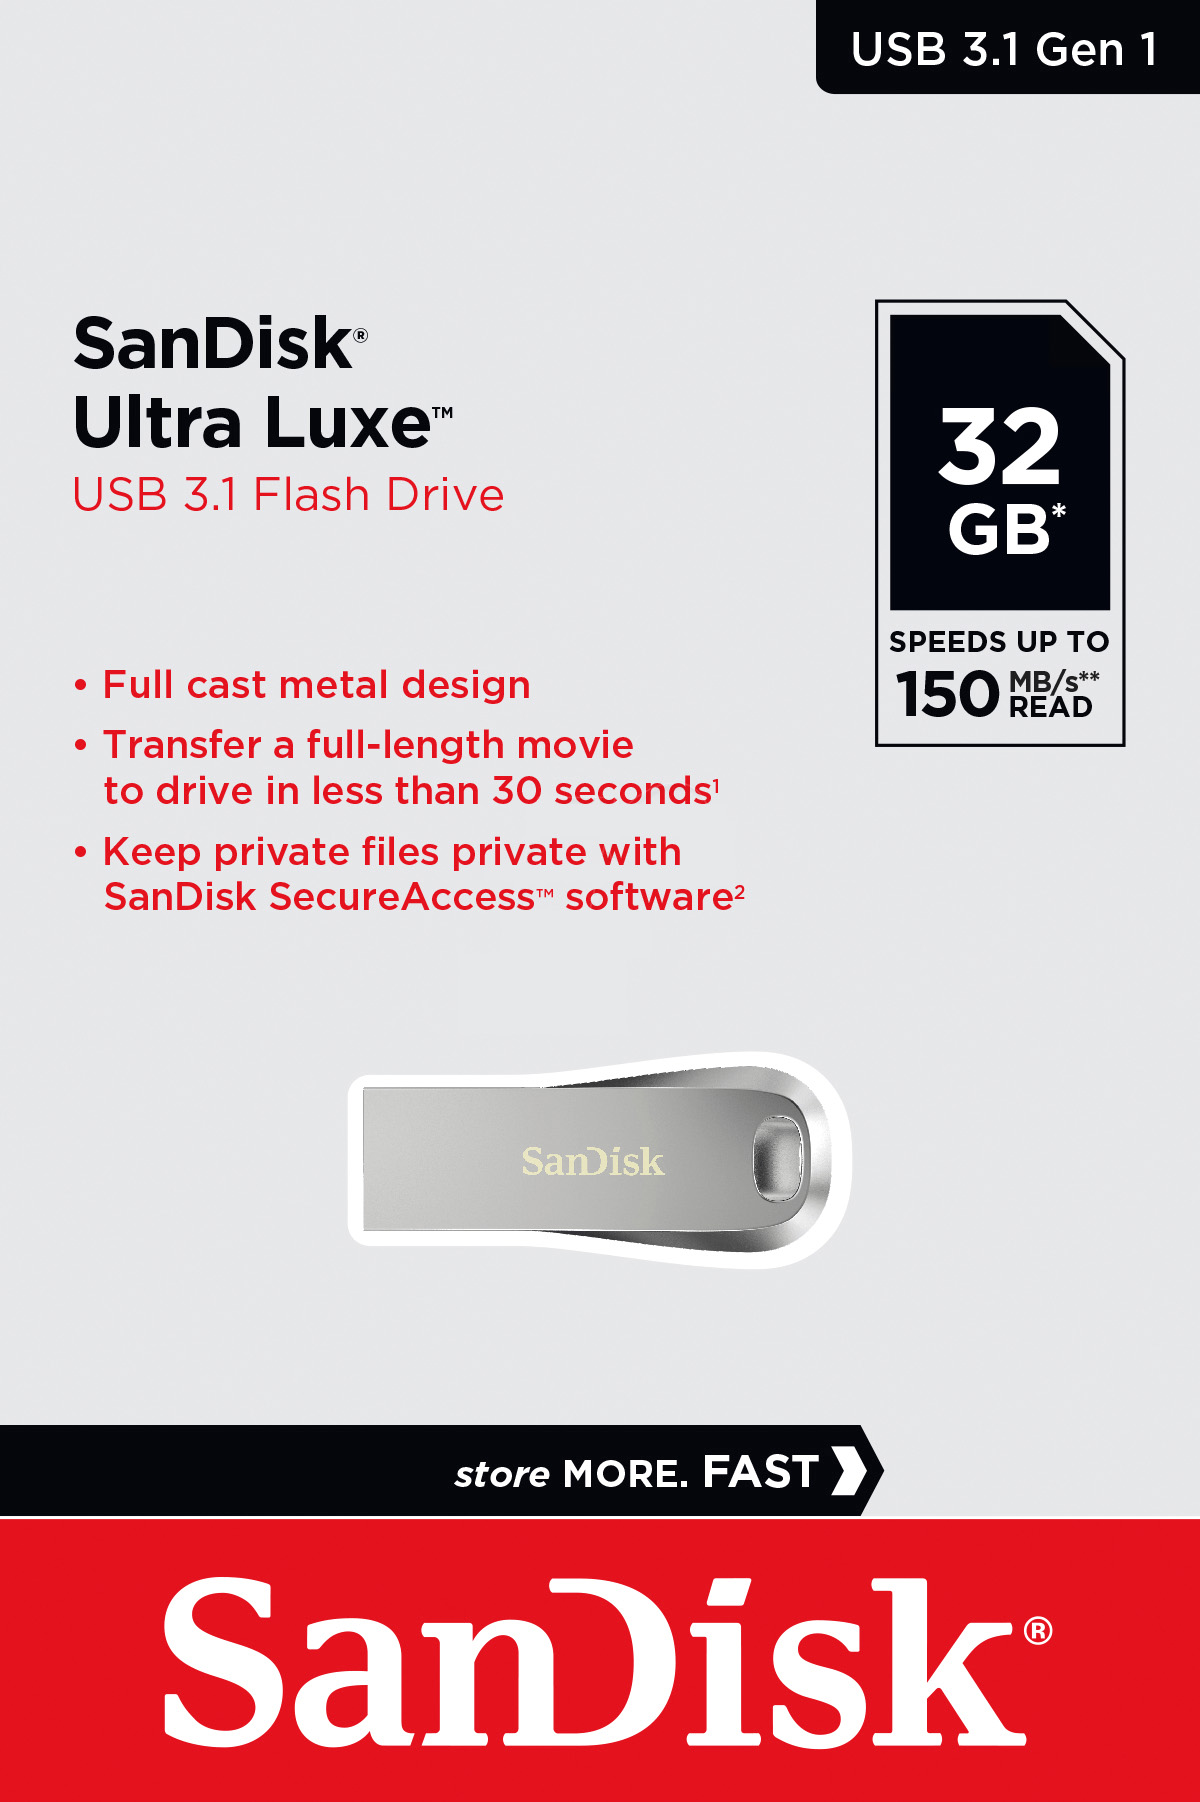 Sandisk USB 3.1 Stick 32GB, Ultra Luxe Typ-A, (R) 150MB/s, SecureAccess, Retail-Blister